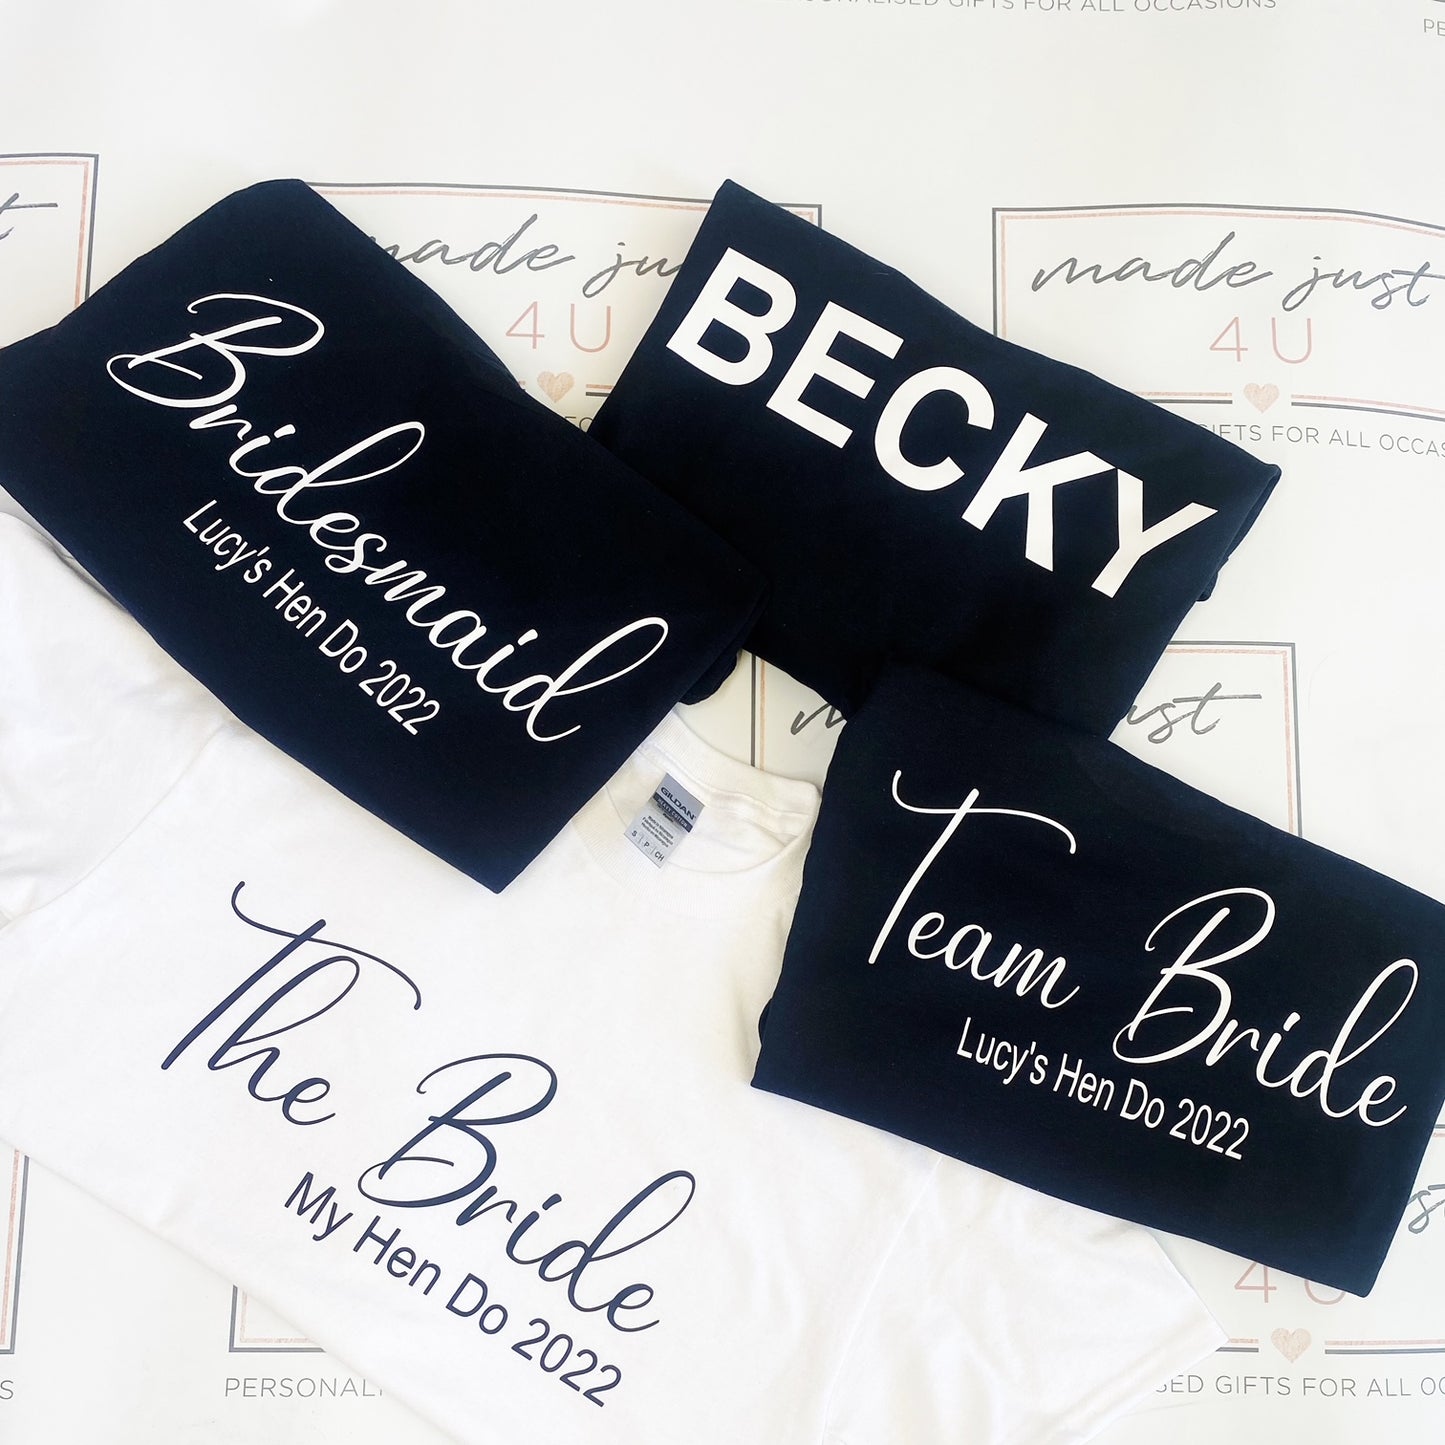 Additional BACK NAMES PRINTS (this is for names on the back of hen/wedding tops being purchased at the same time )